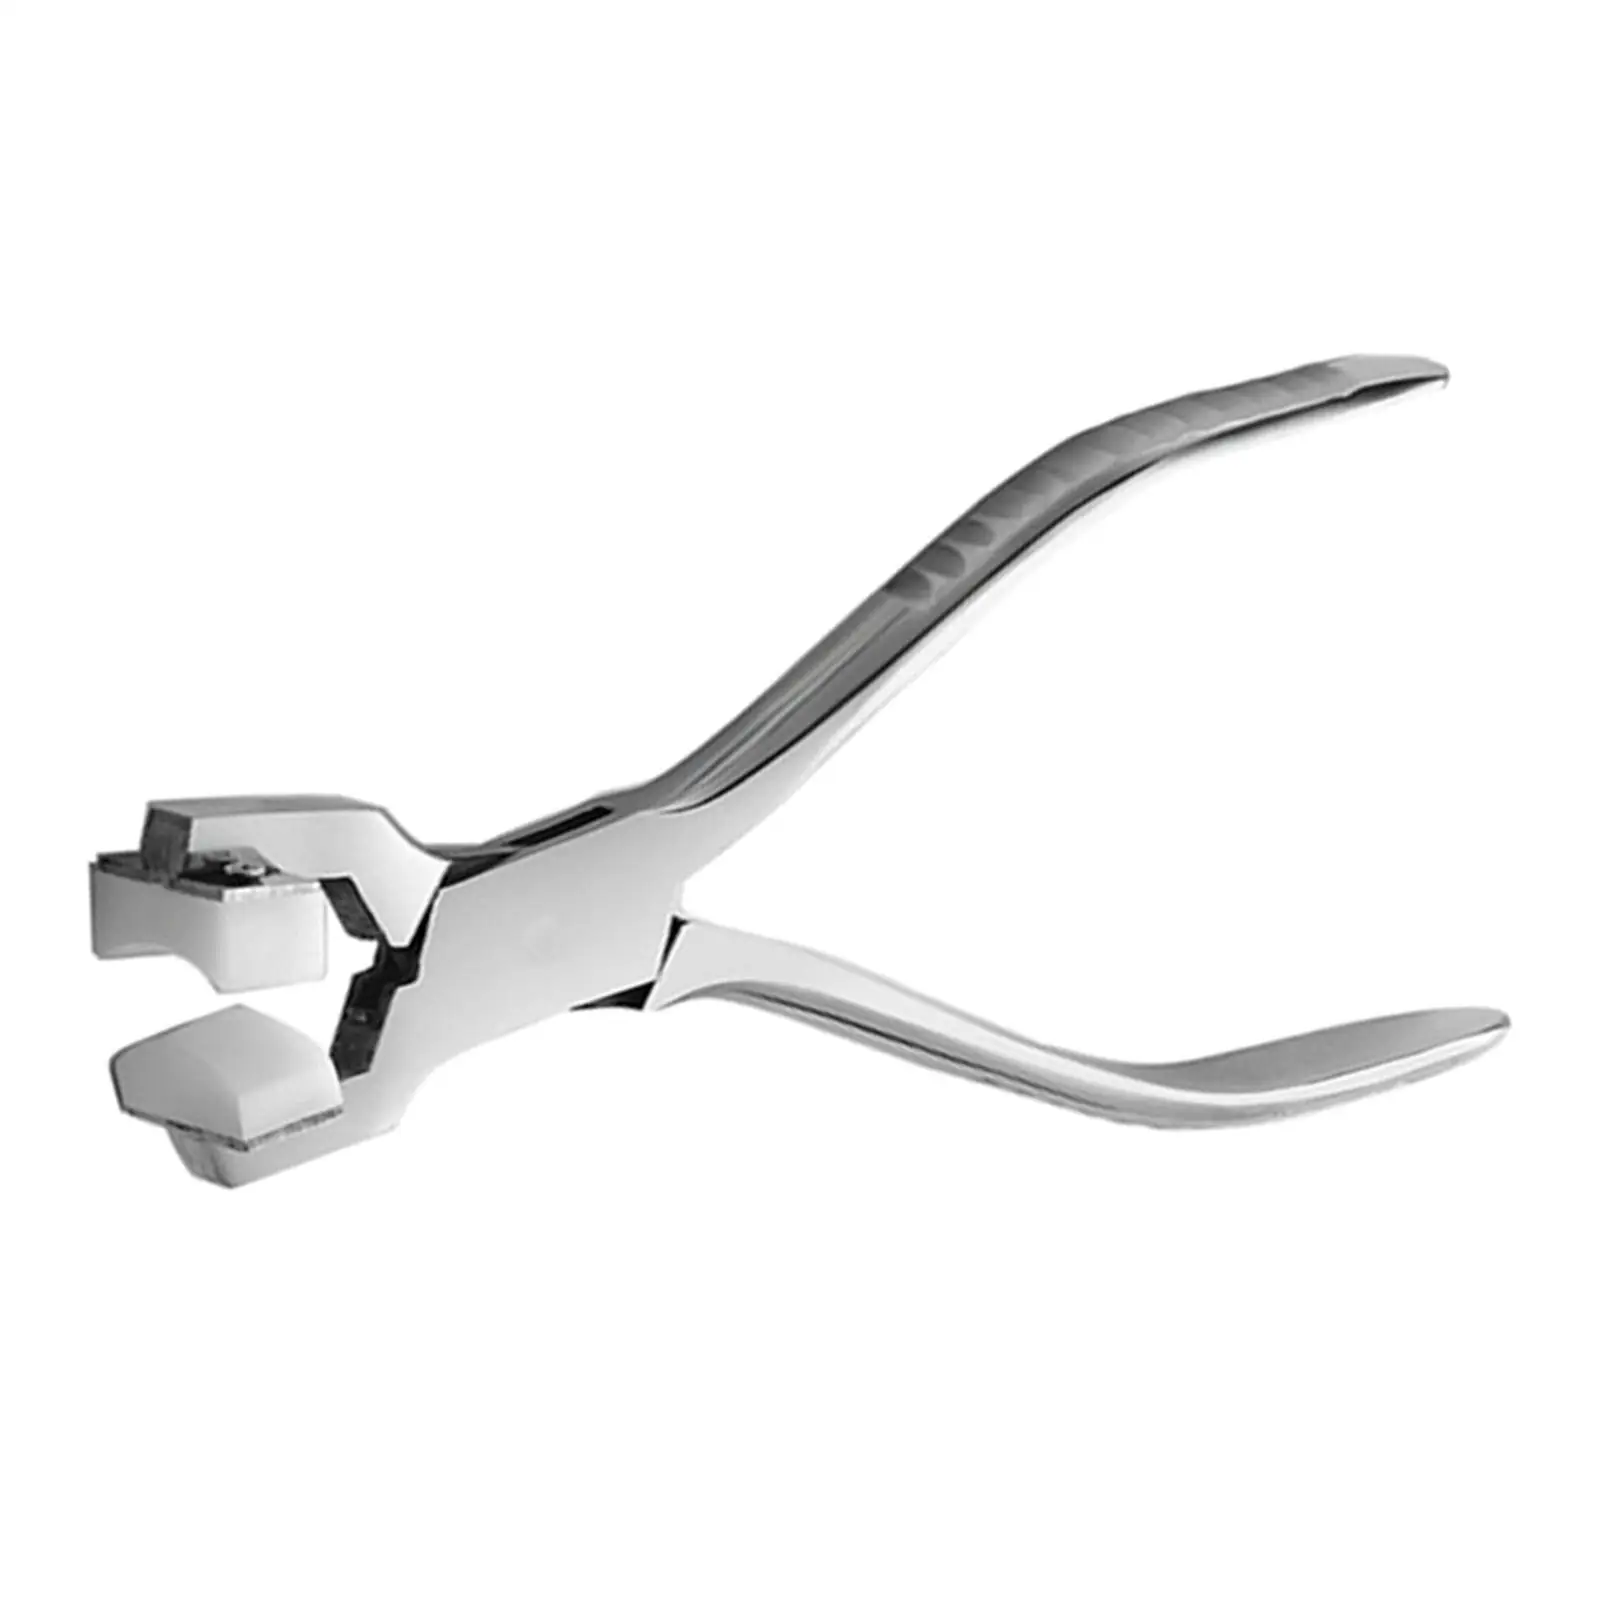 Durable Bracelet Bending Pliers Jewelry Making Ring Curving DIY Professional Stainless Steel Forming Bangle Tool Accessories